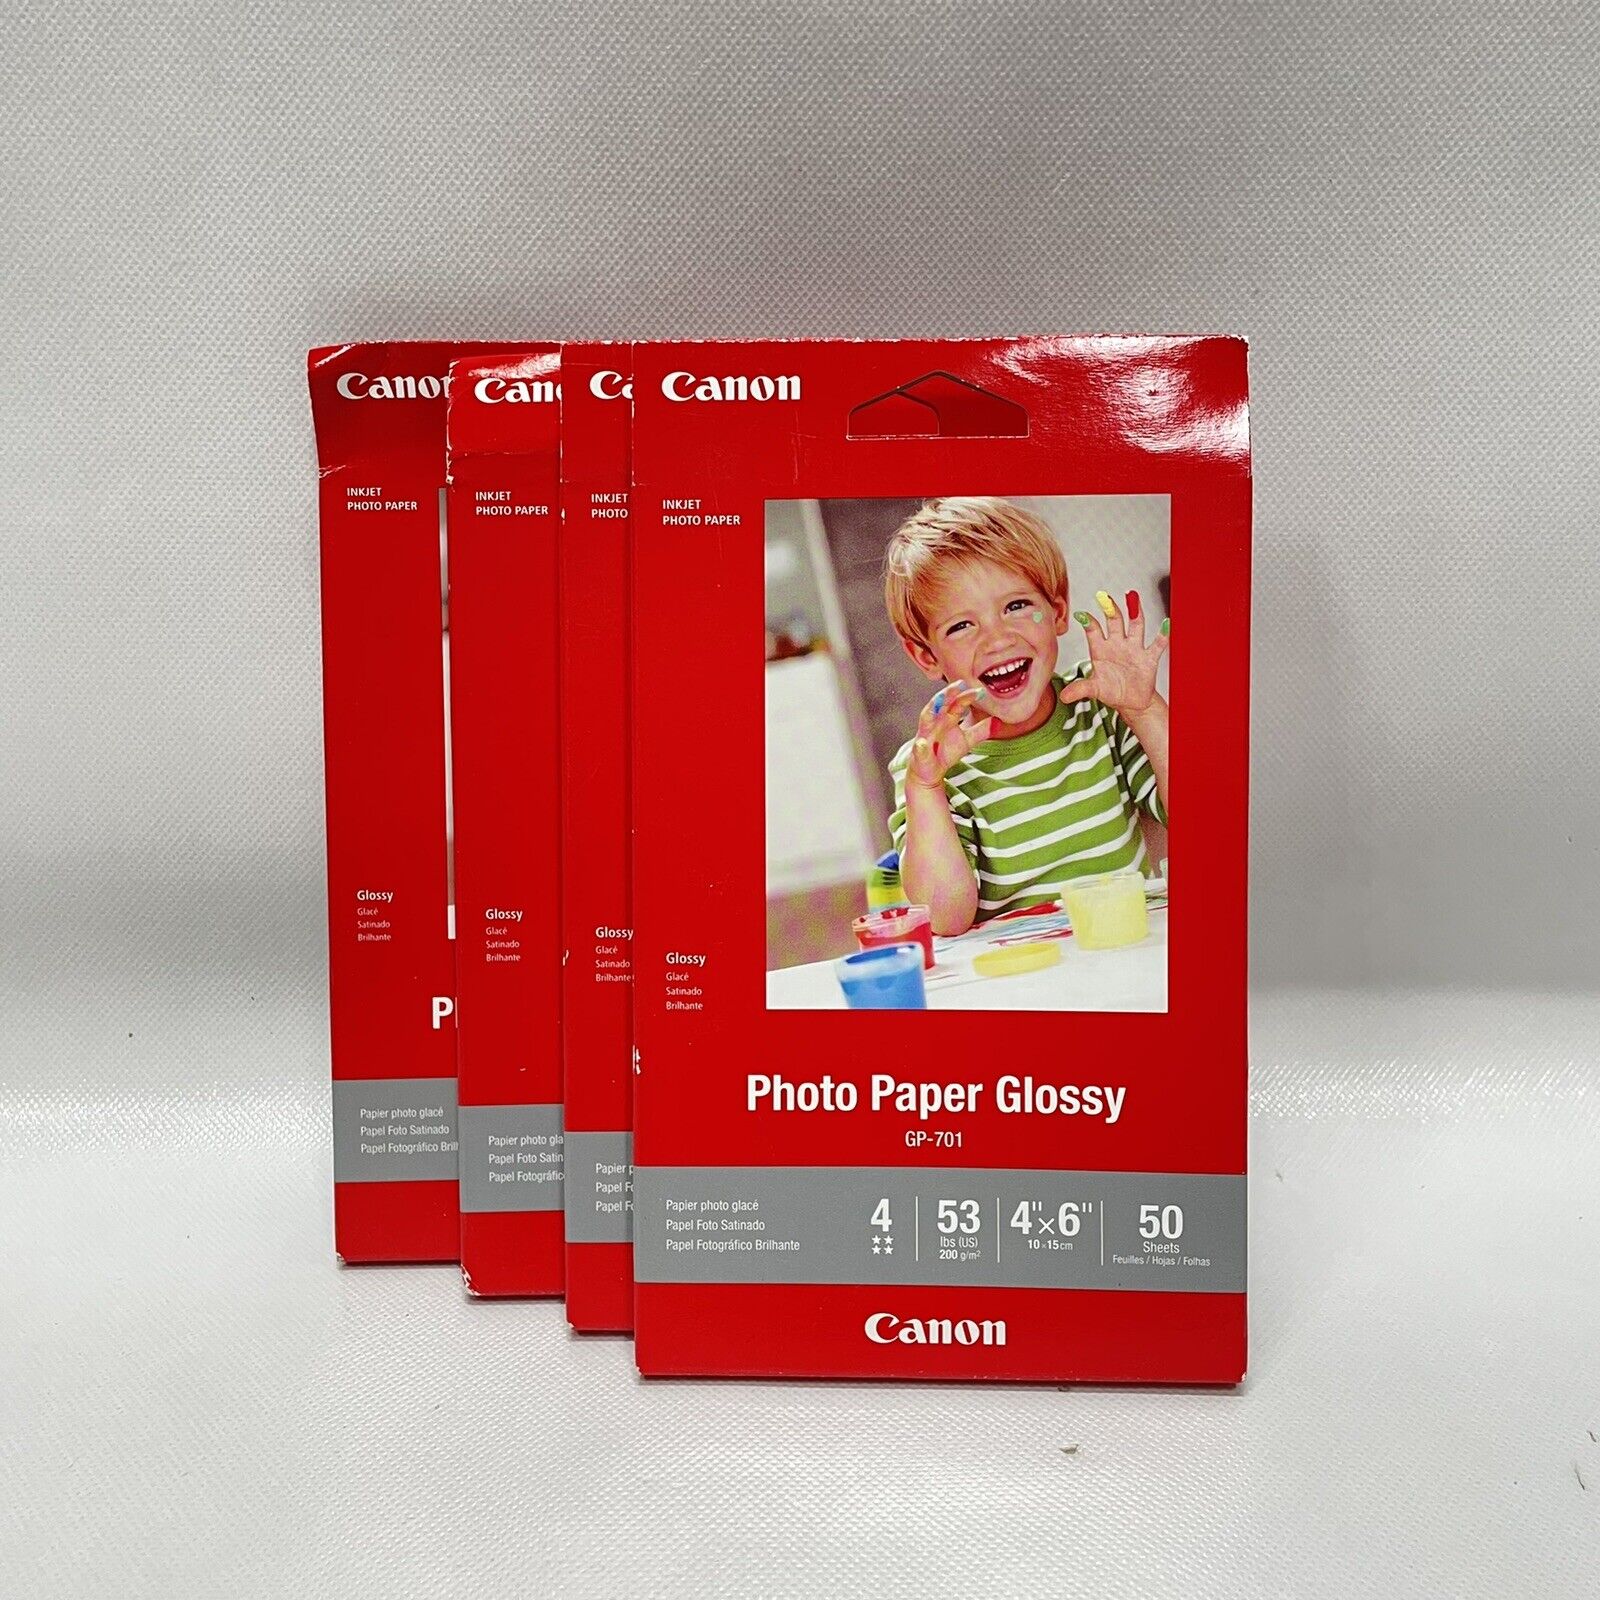 Canon Glossy Photo Paper GP-701 4x6in Pack / Lot Of 4  200 Sheets